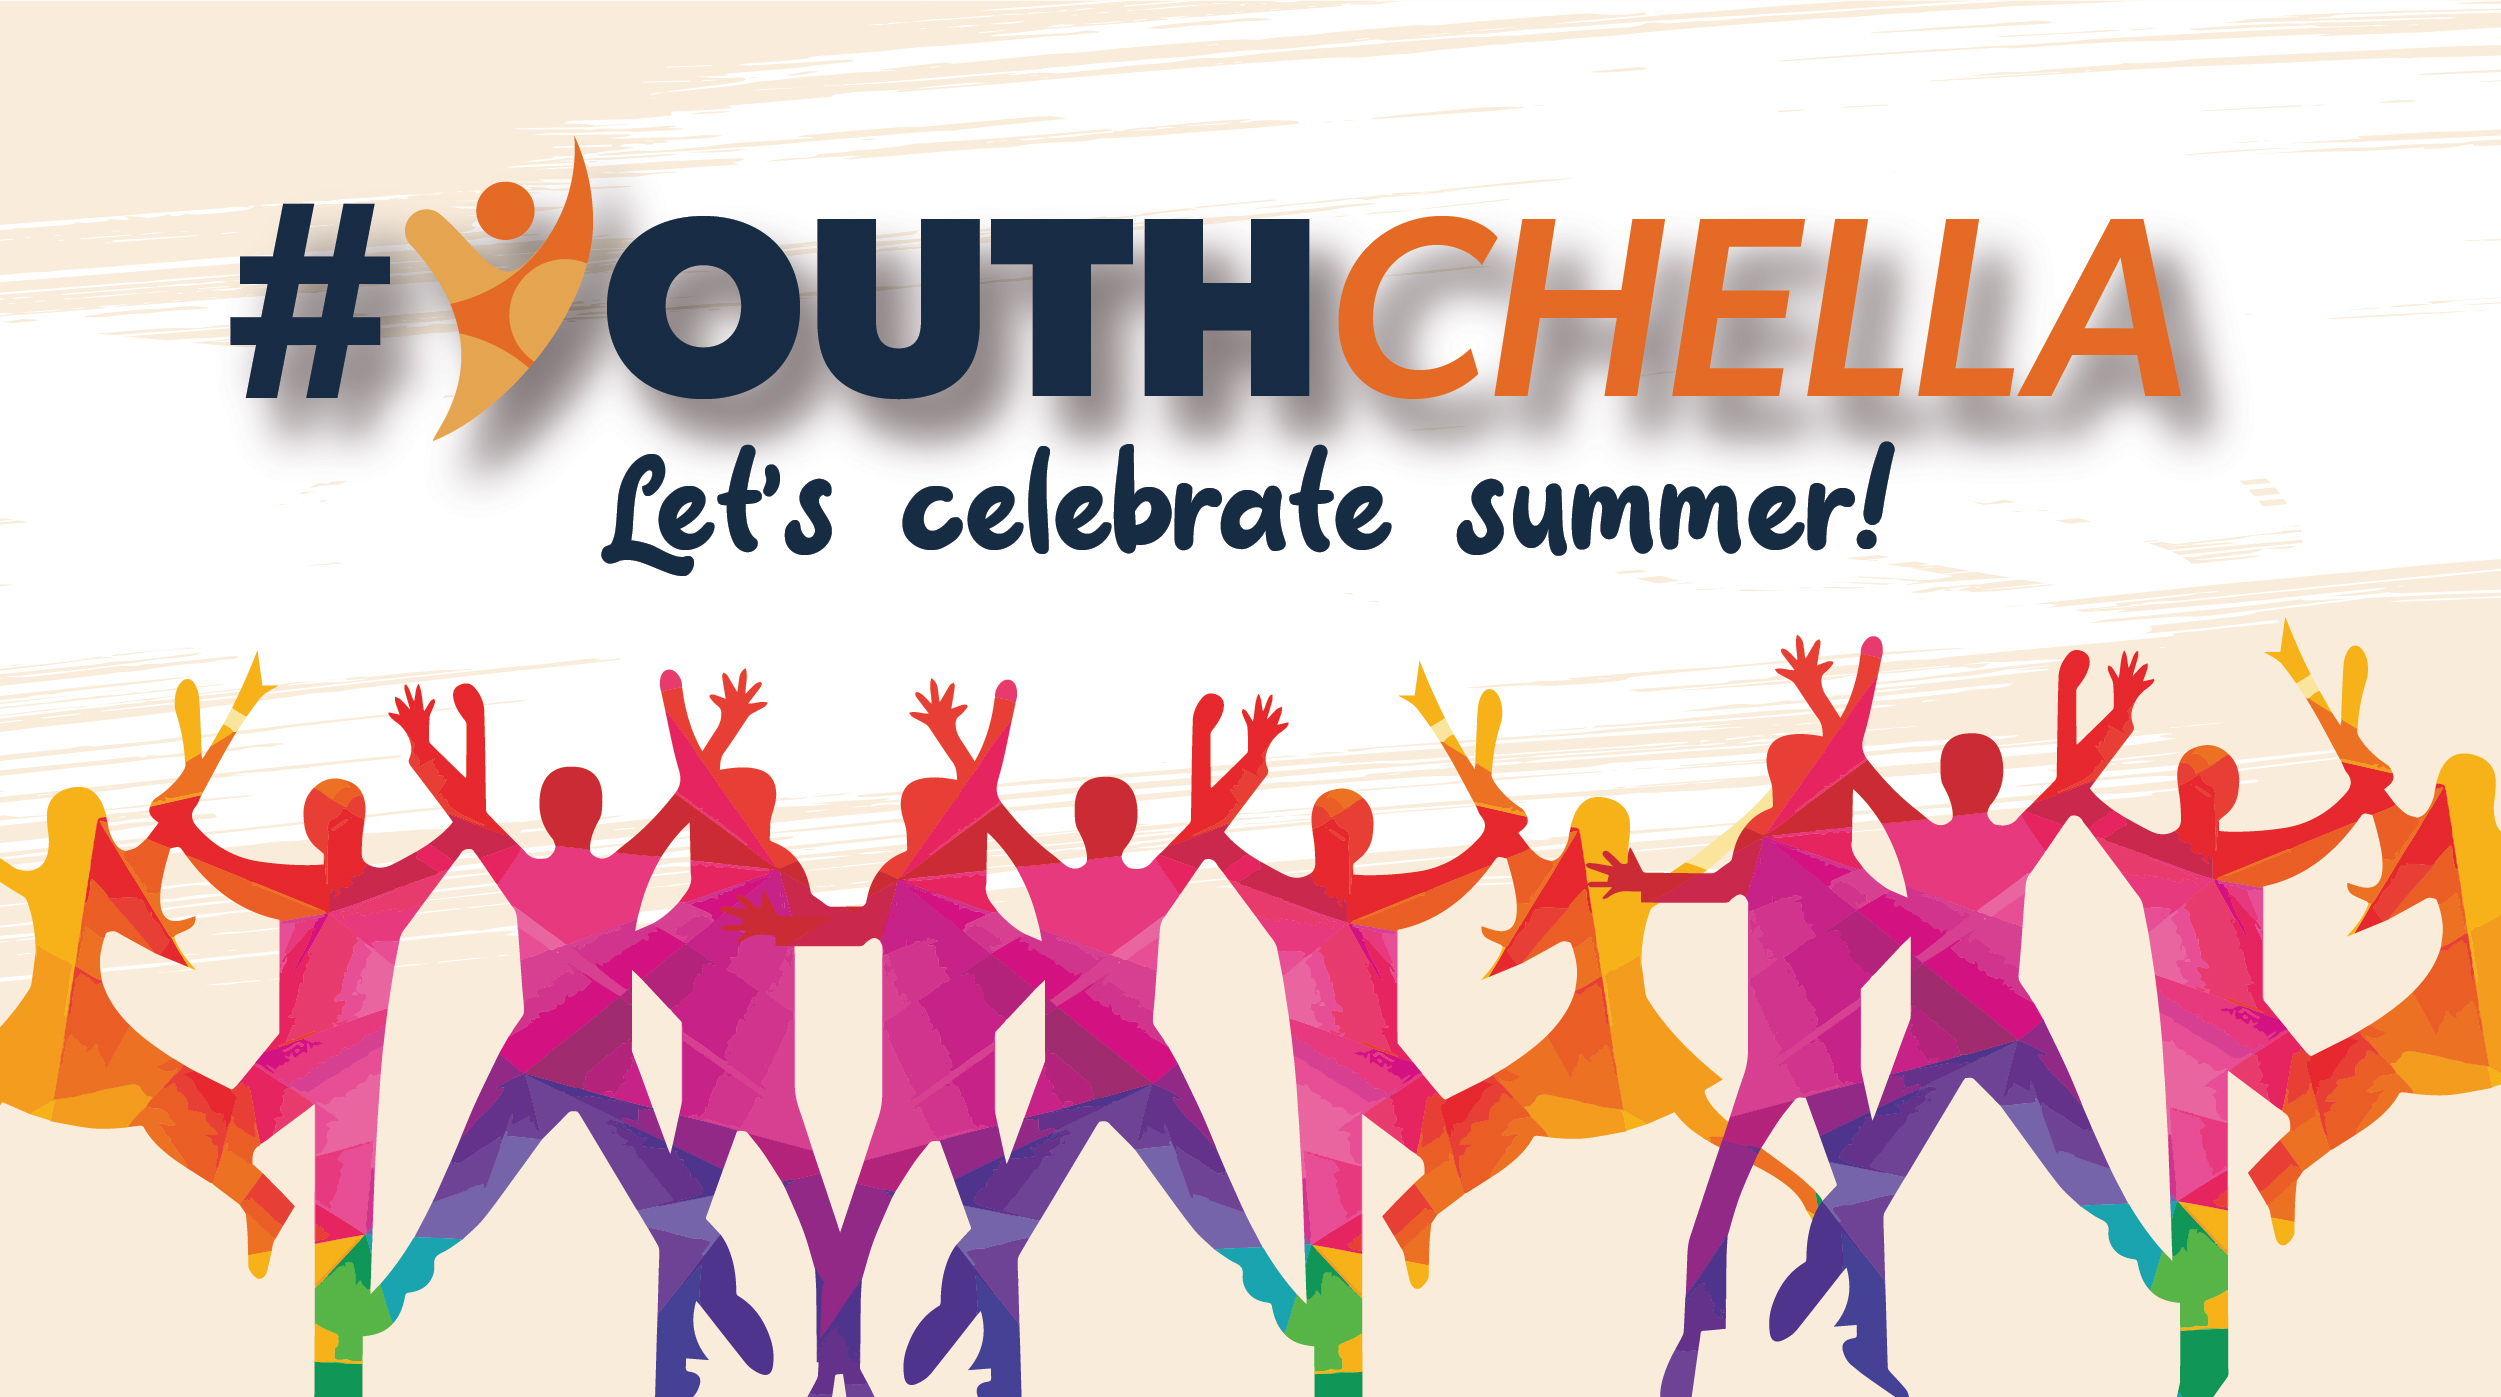 Get Ready for Youthchella!